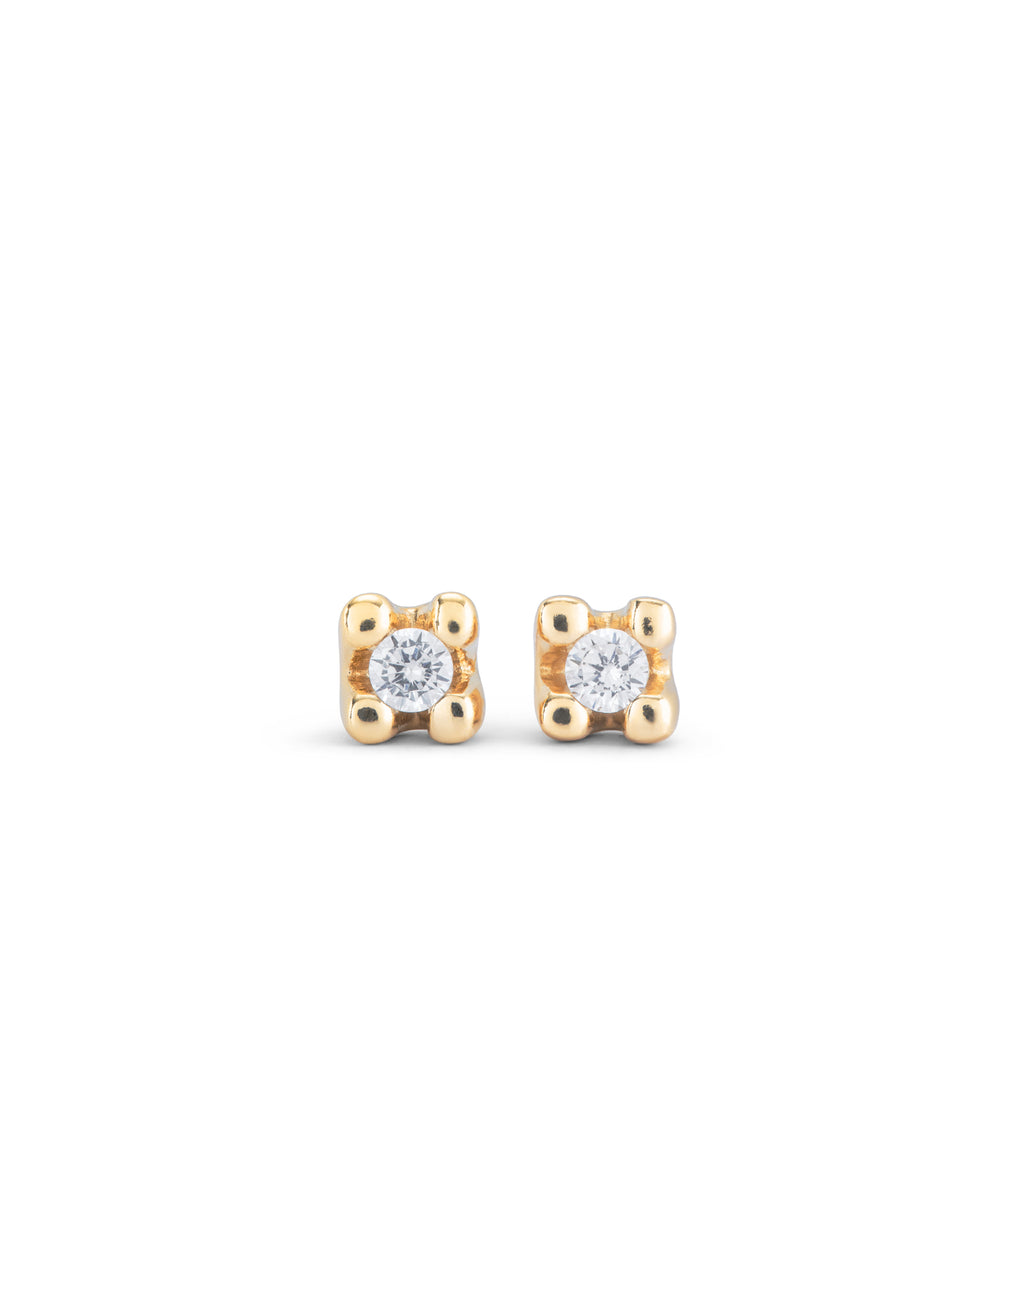 Sterling silver-plated 18K gold-plated earrings with white cubic zirconia